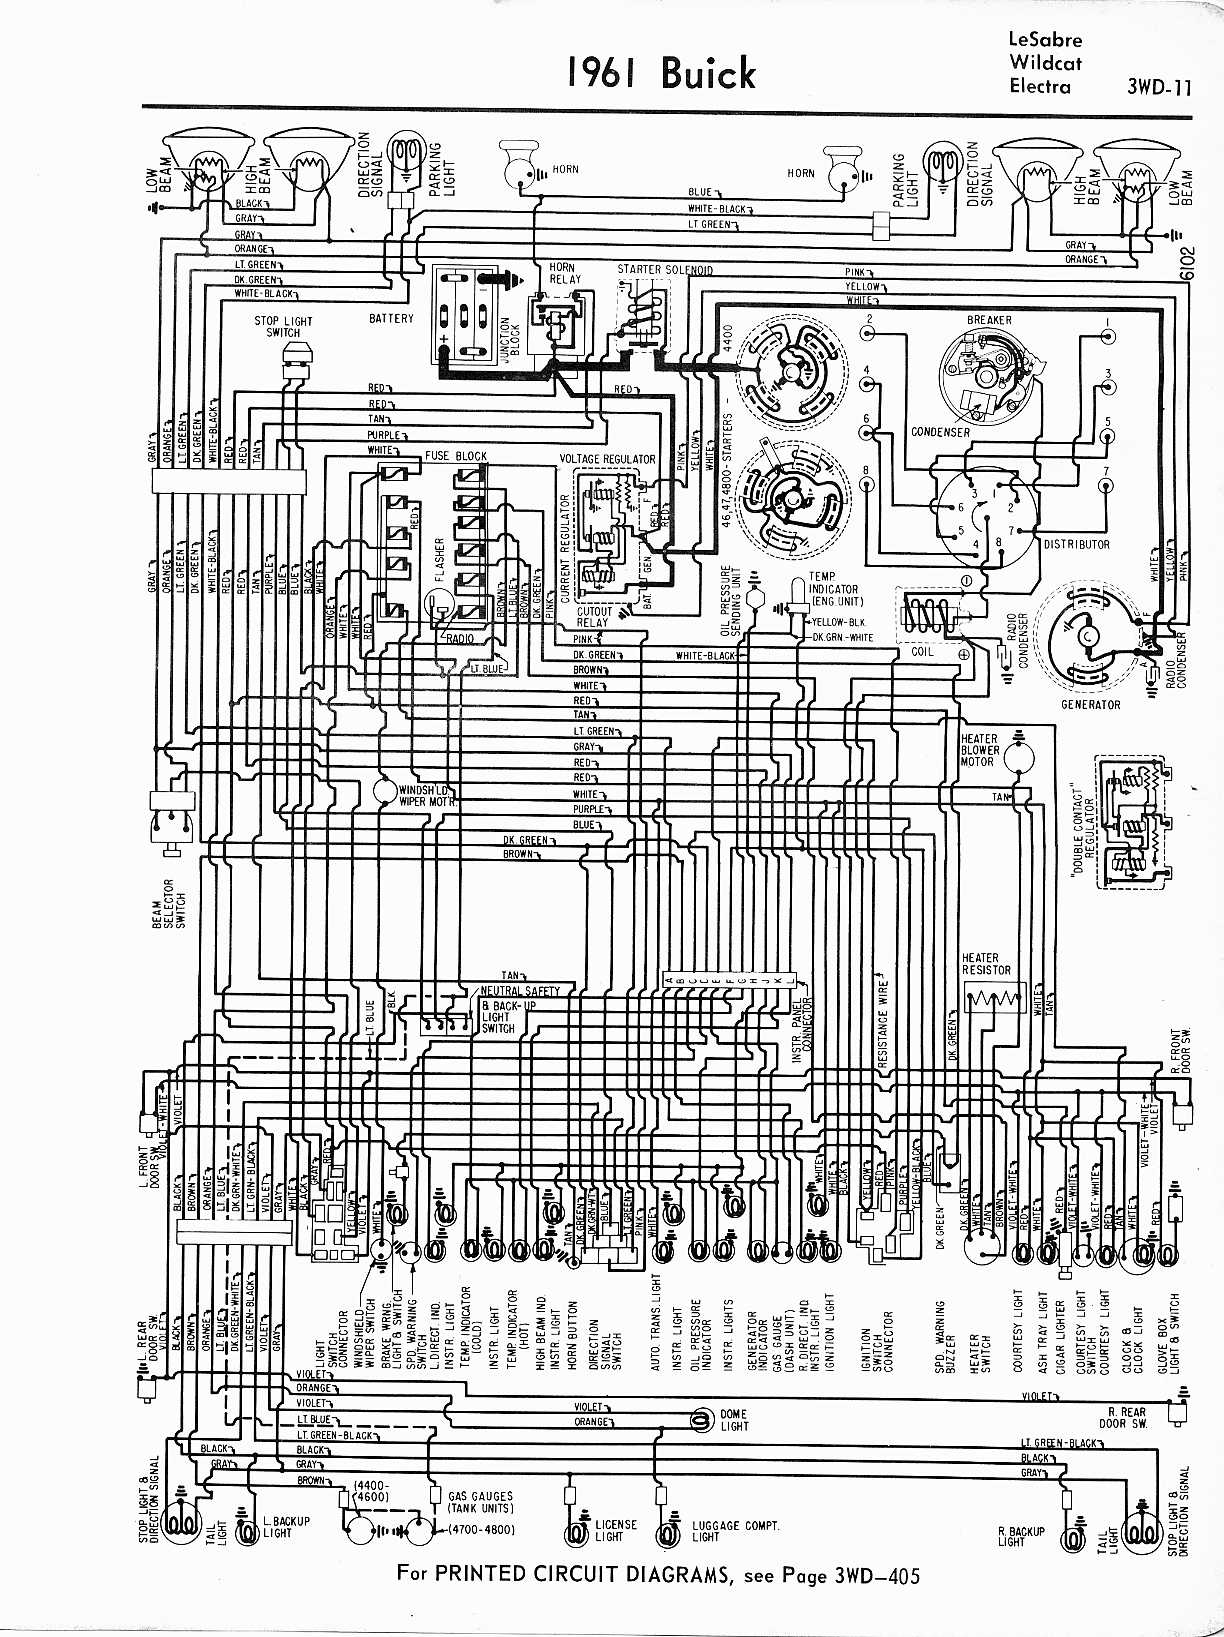 [DIAGRAM] 72 Buick Gs Wiring Diagram FULL Version HD Quality Wiring